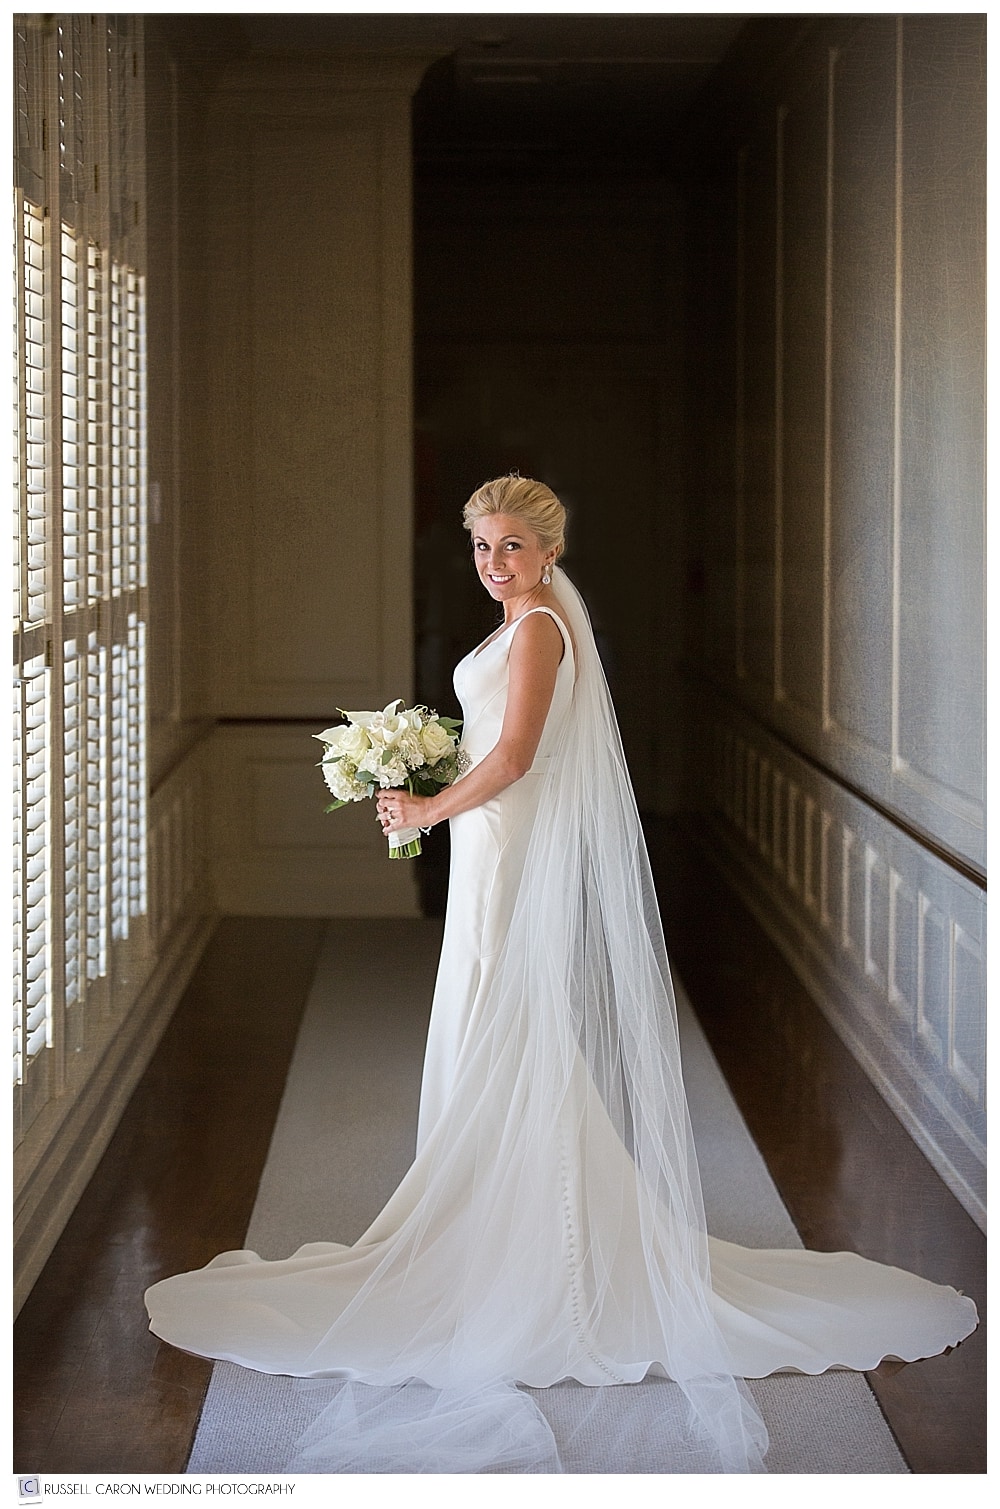 wedding gown from Andrea's Bridal featured on Liz loves lists 11-18-16